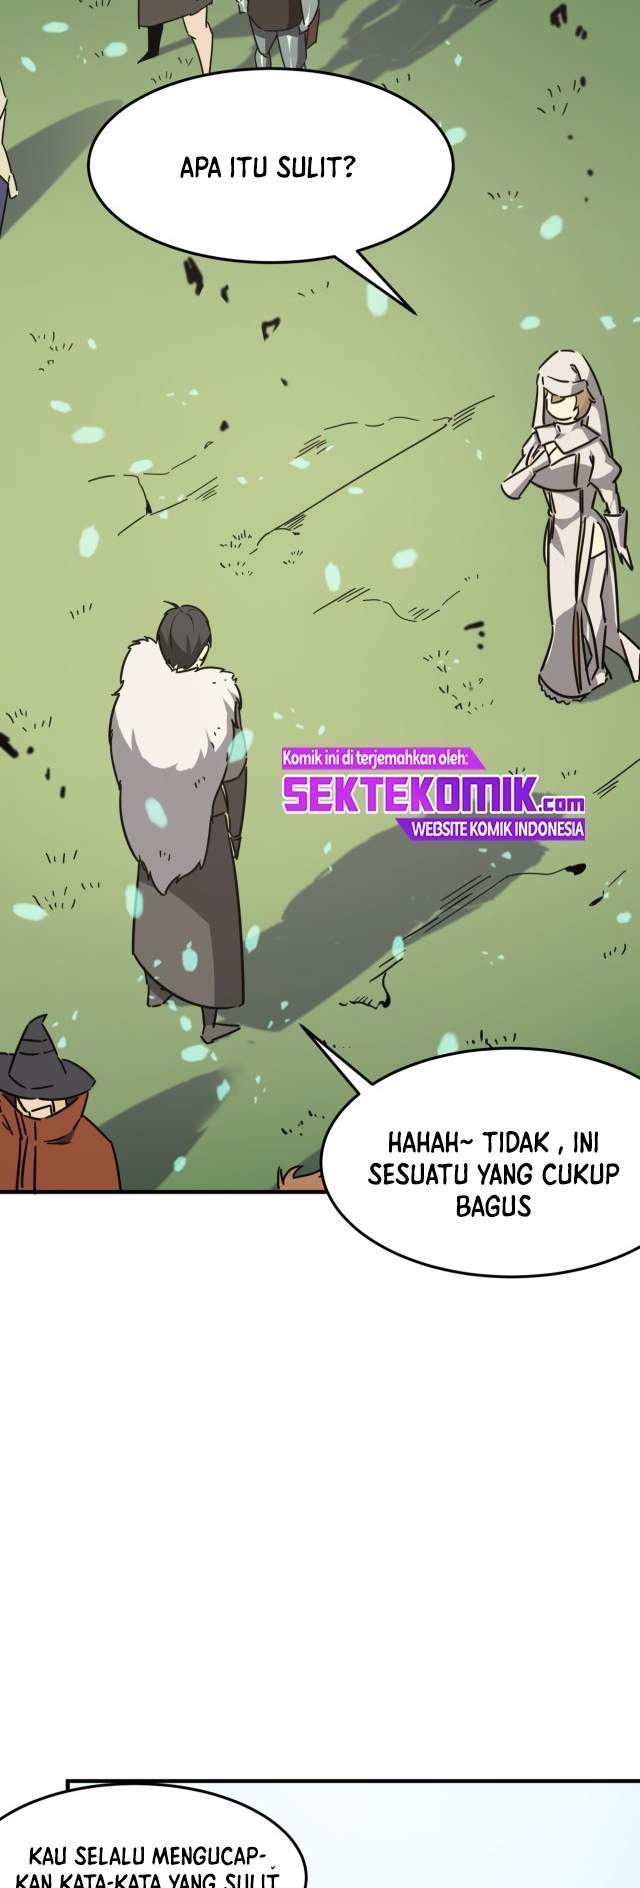 Hero! Watch up! Chapter 07